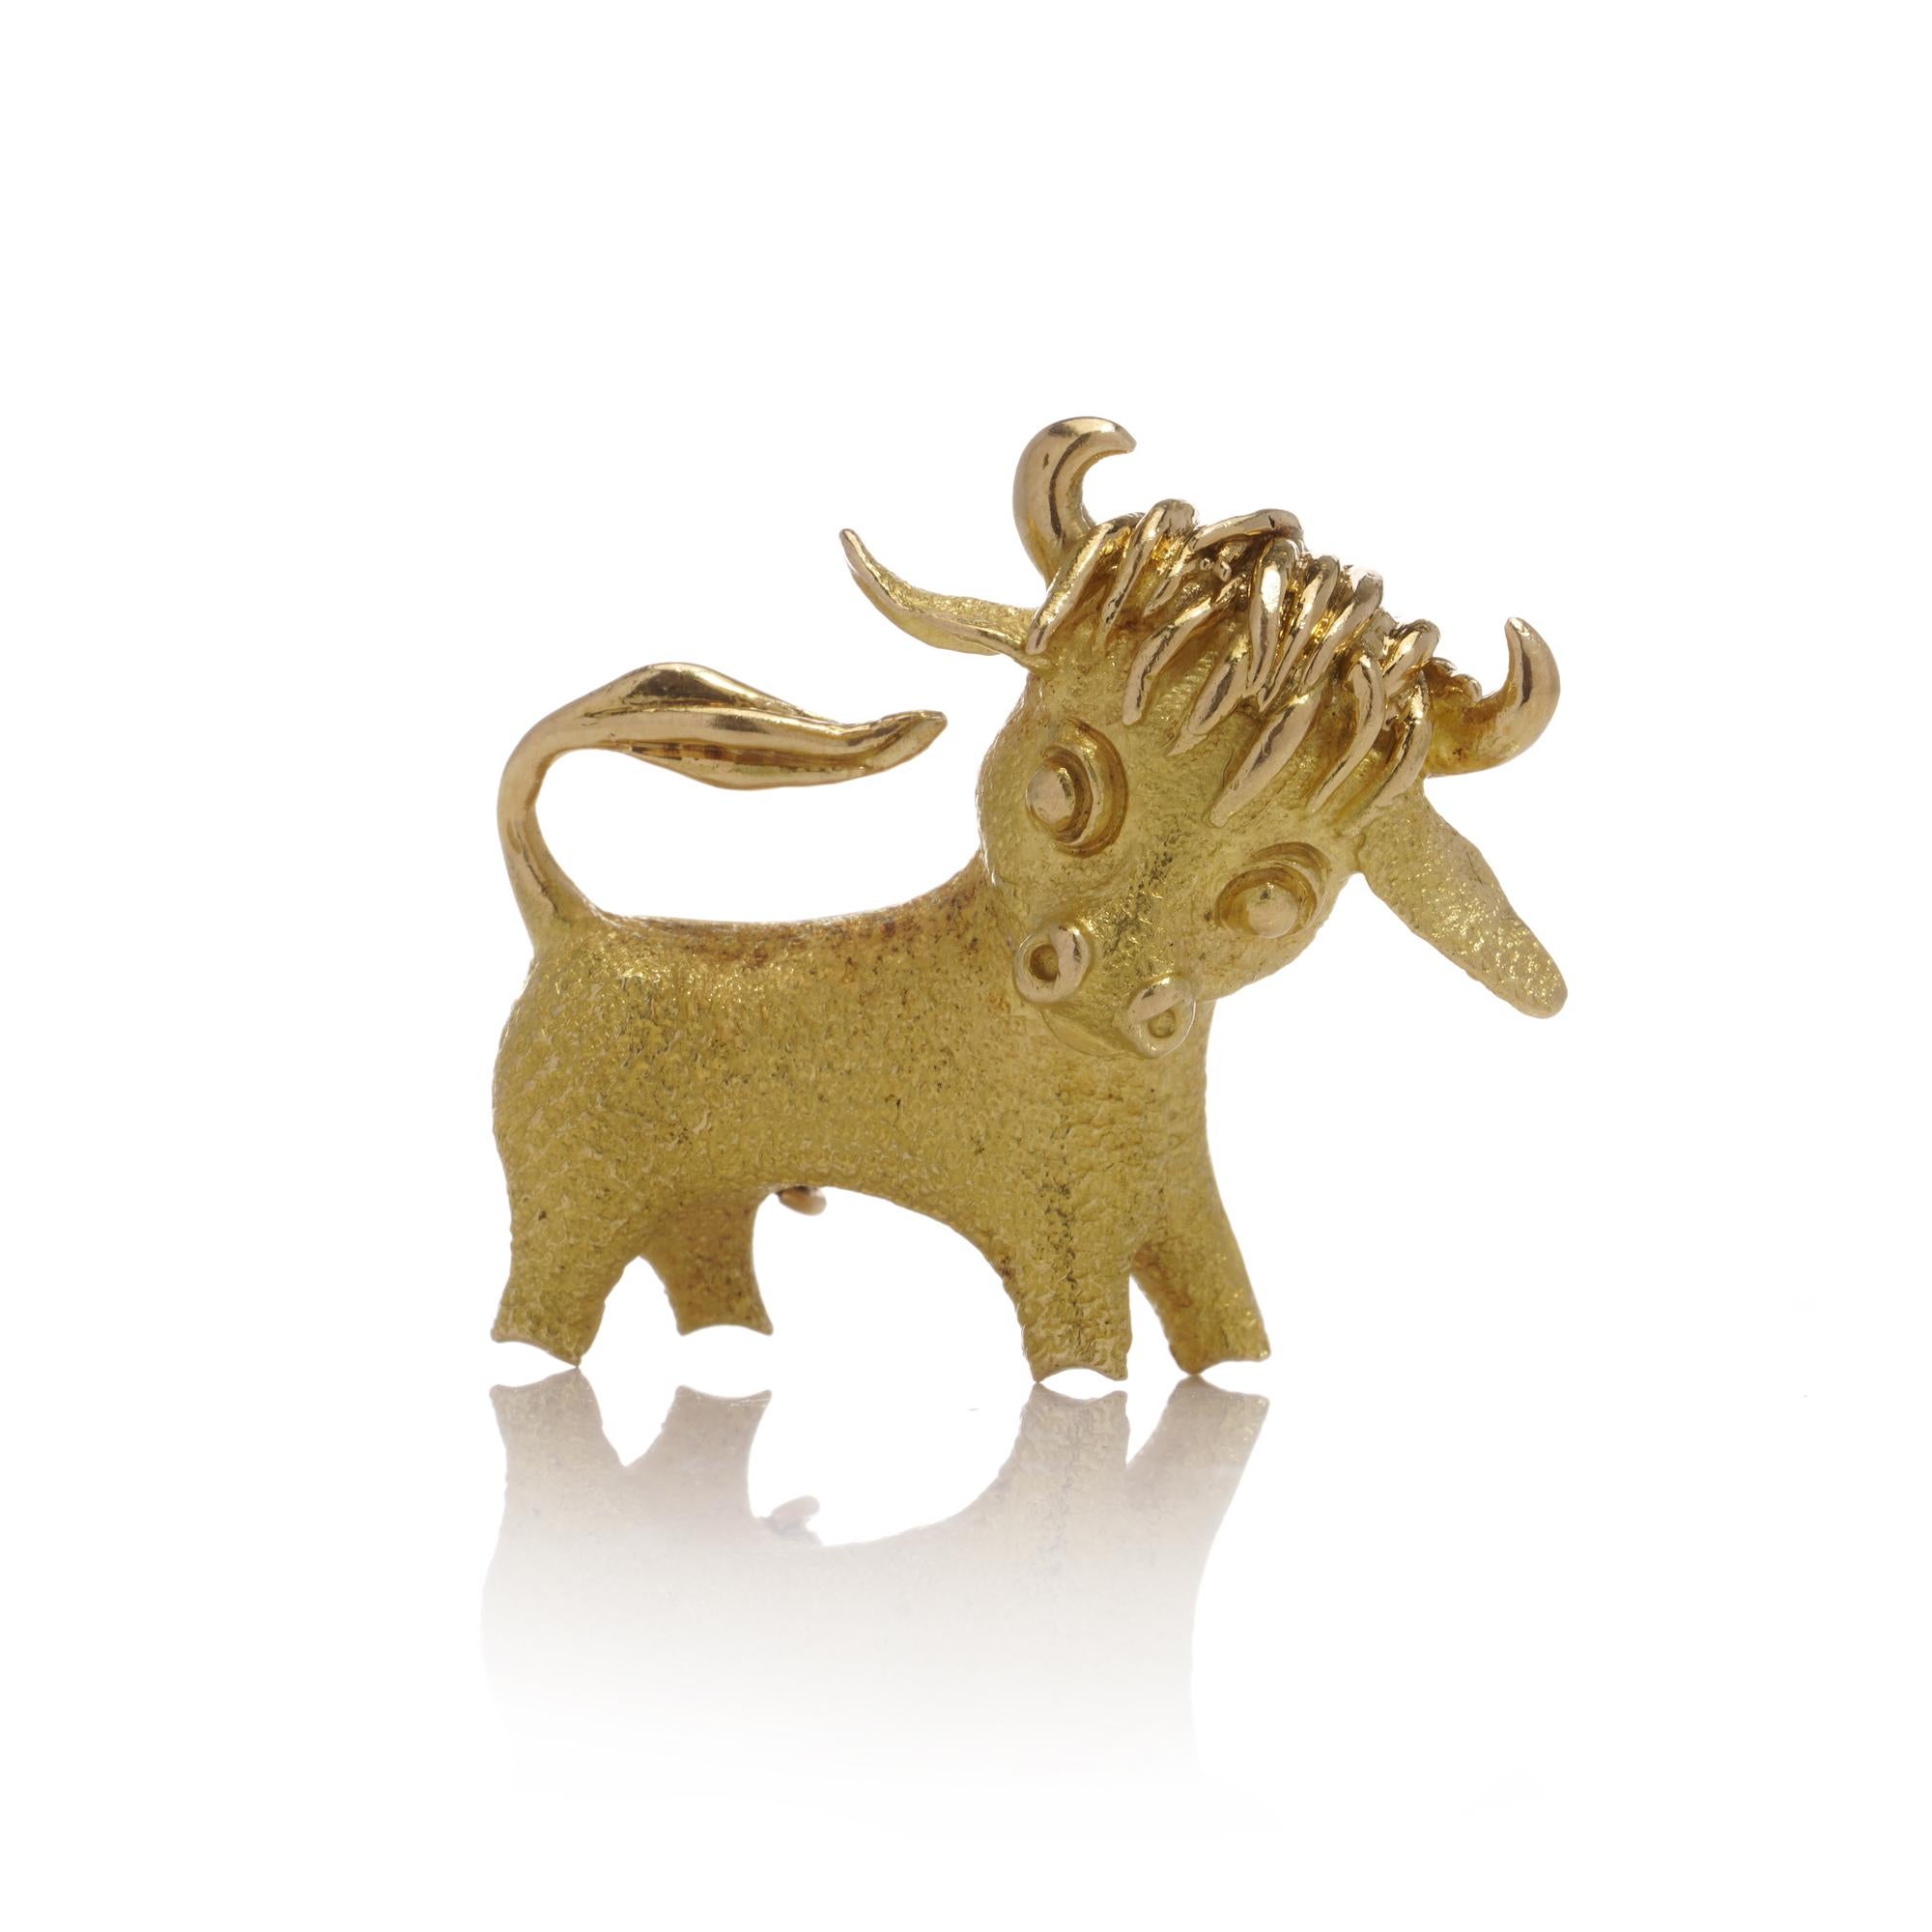 George Lederman vintage 18kt. yellow gold baby bull brooch.
Hallmarked with George Lederman mark, eagle's head, depose ssm. 

The brooch features a whimsical interpretation of a baby bull, crafted in 18kt. yellow gold. 

Dimensions: 
Width: 3.5